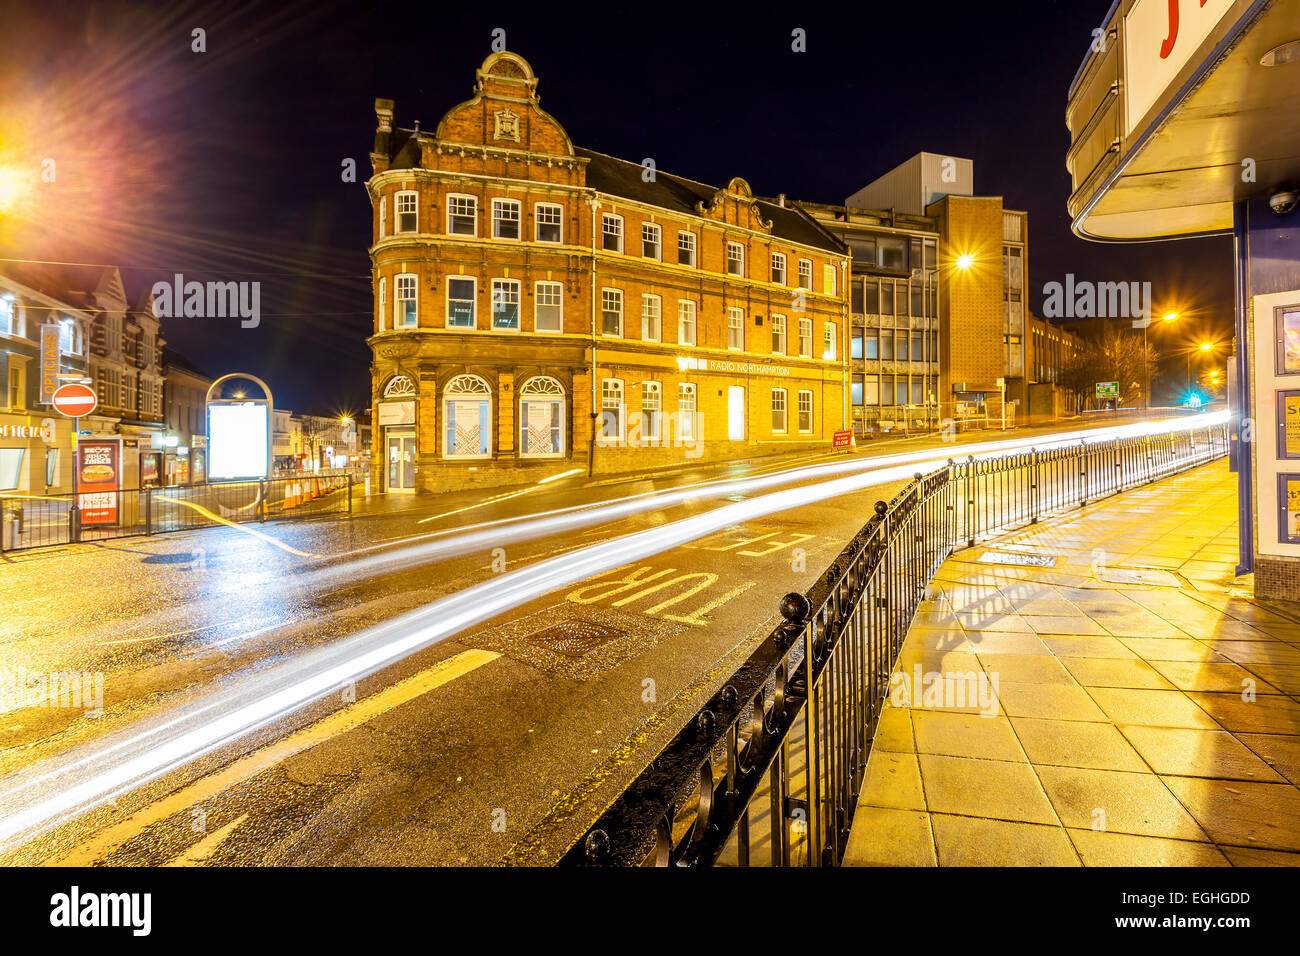 Radio Northampton Broadcasting House early hours of the morning Stock Photo